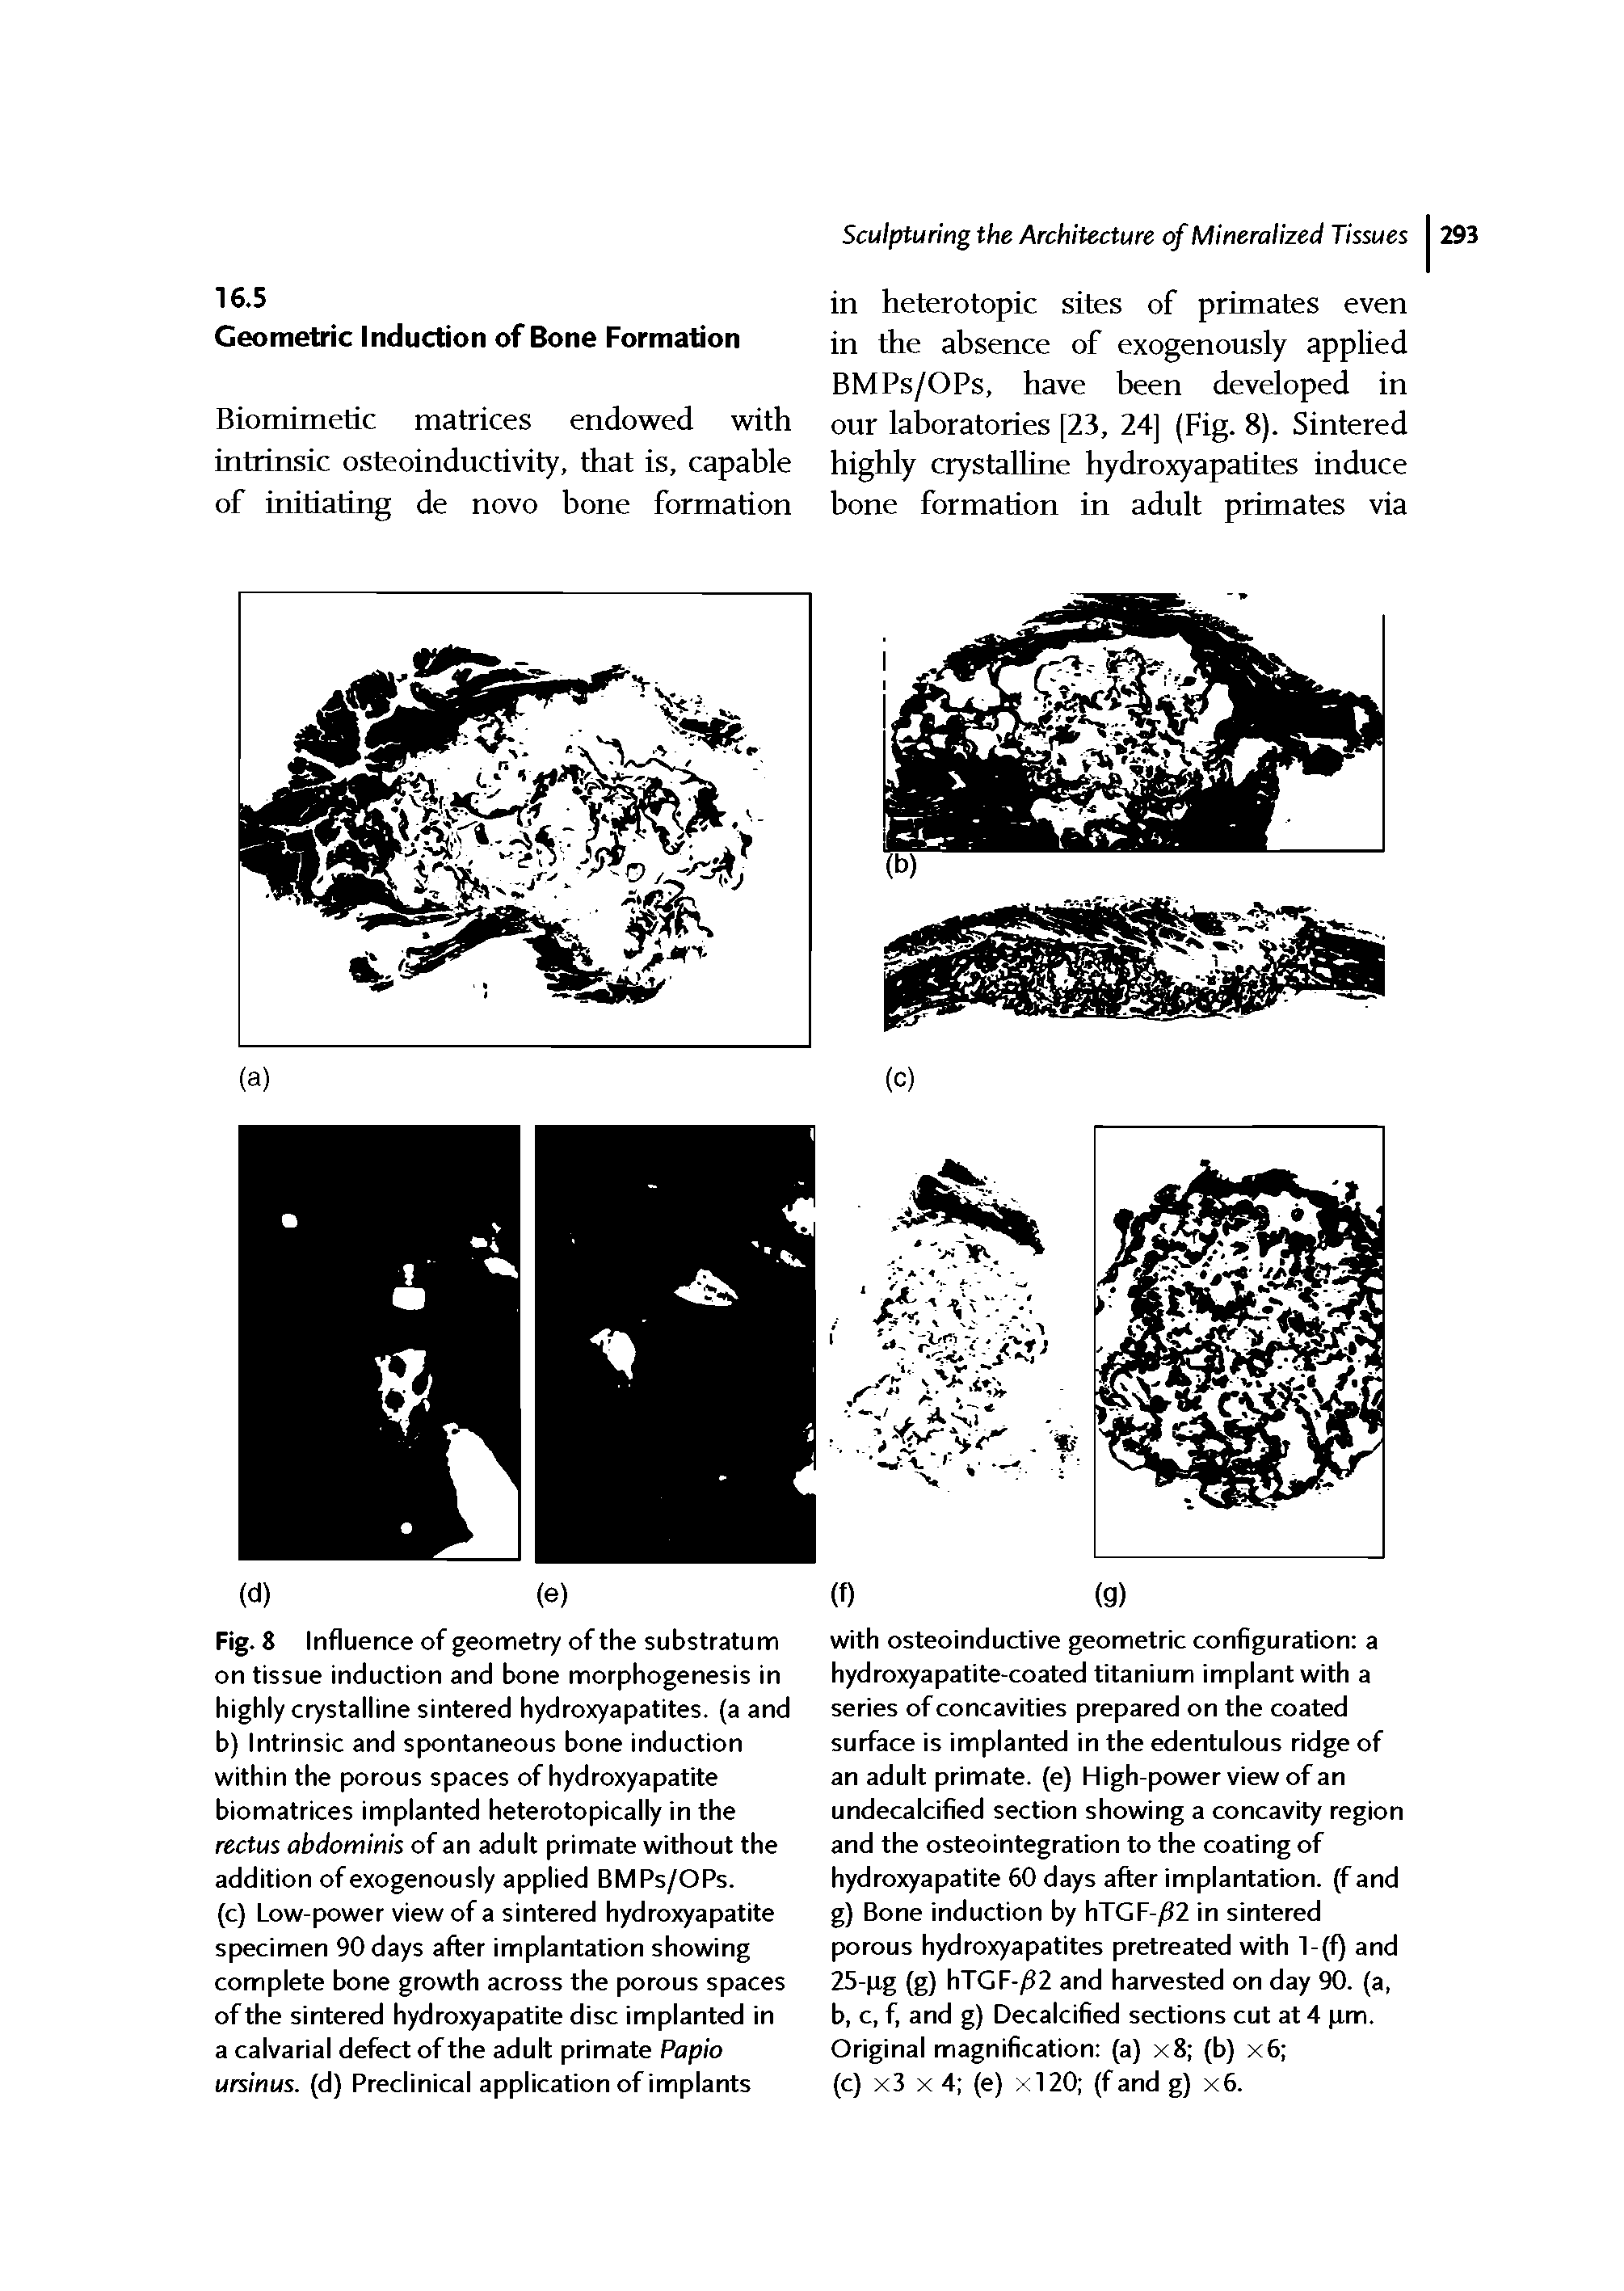 Fig. 8 Influence of geometry of the substratum on tissue induction and bone morphogenesis in highly crystalline sintered hydroxyapatites, (a and b) Intrinsic and spontaneous bone induction within the porous spaces of hydroxyapatite biomatrices implanted heterotopically in the rectus abdominis of an adult primate without the addition of exogenously applied BMPs/OPs.